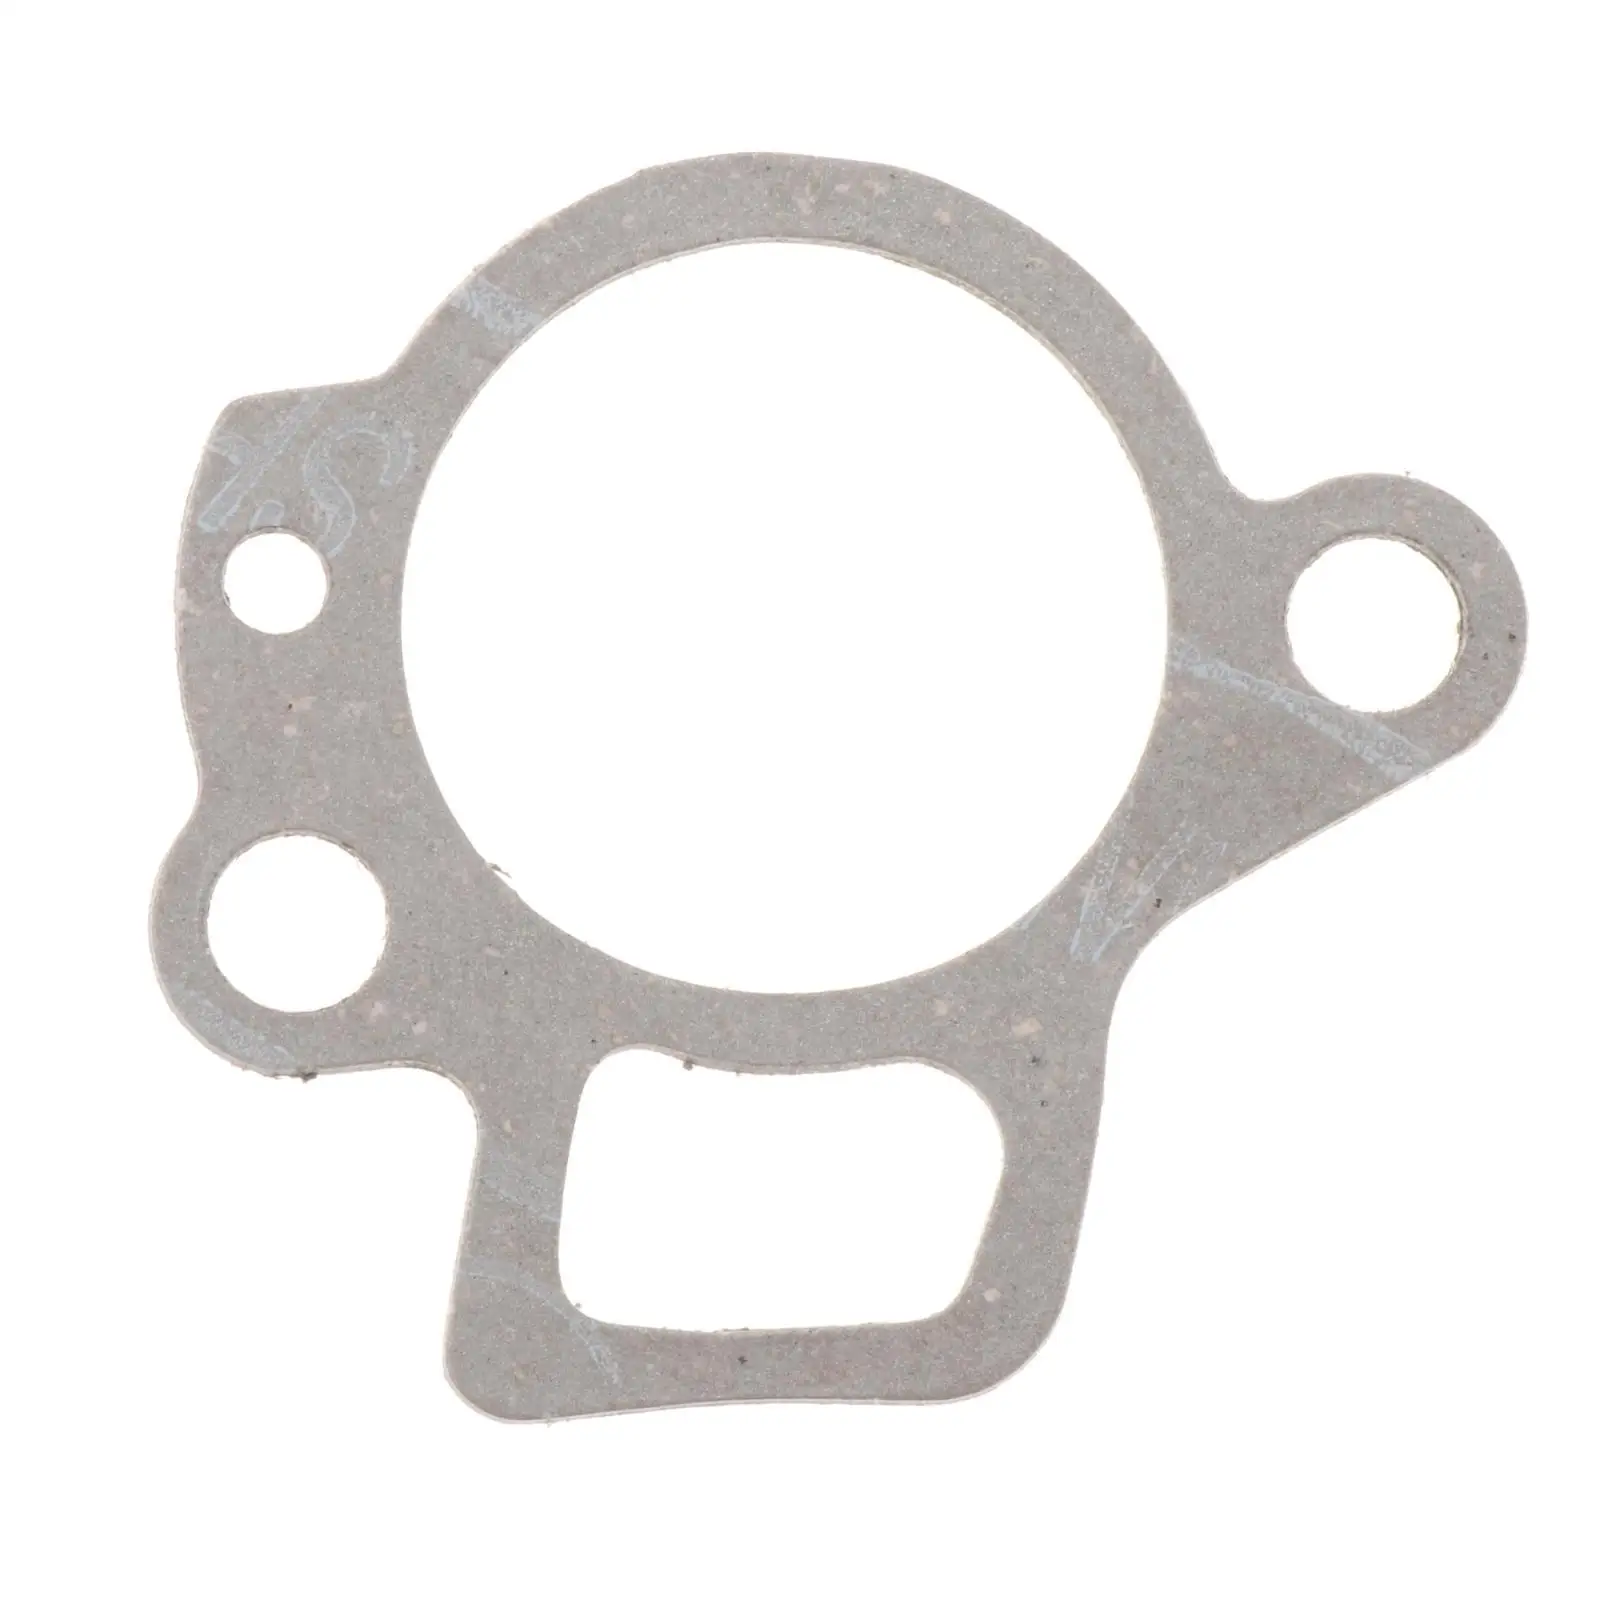 541-25 Thermostat Gasket 6H3-12414-A1 Fit for Yamaha Outboard Engine 9.9-70 HP Accessories High Performance High Reliability